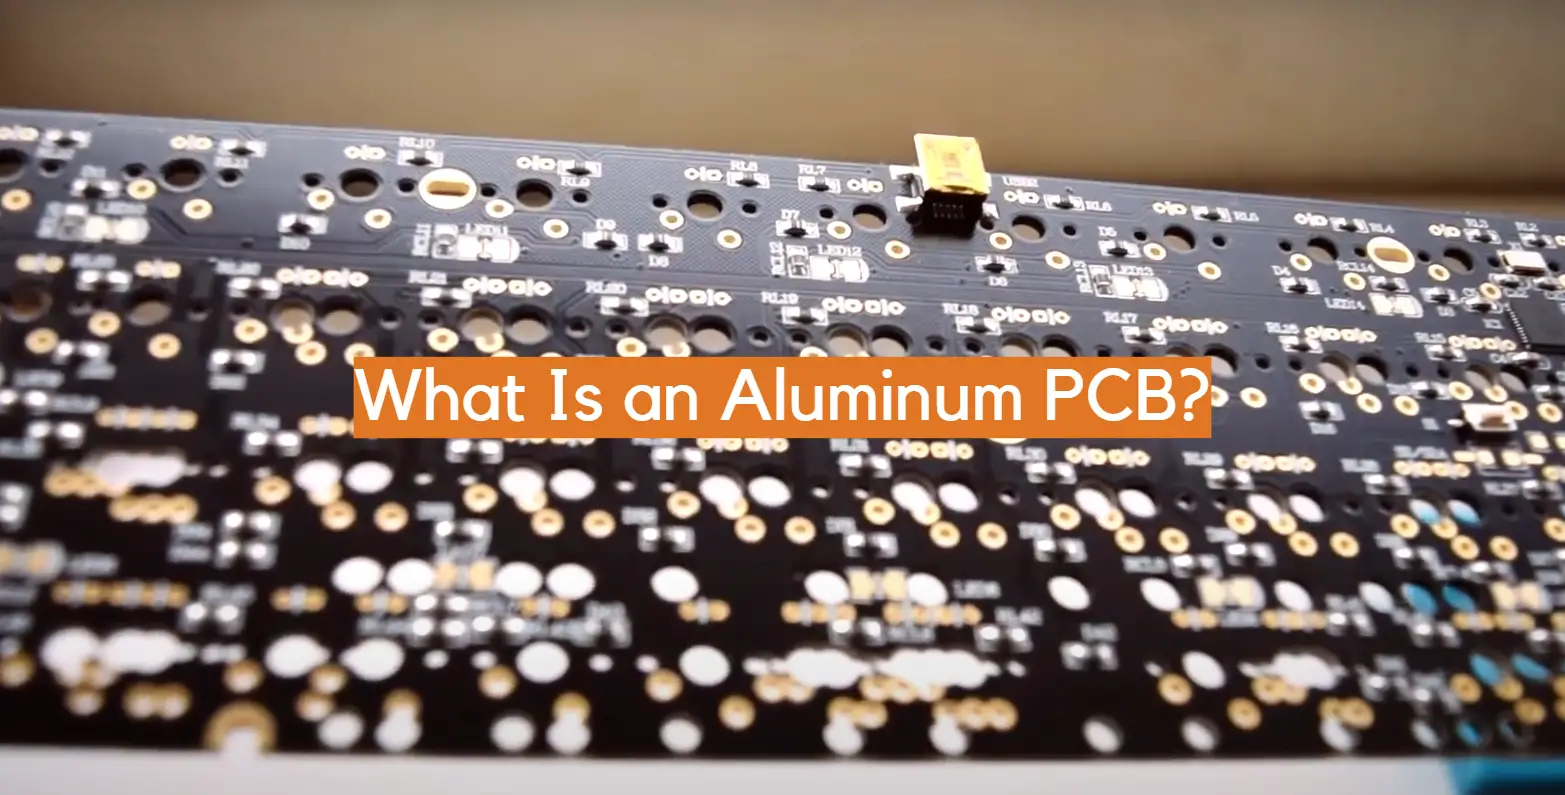 What Is an Aluminum PCB?